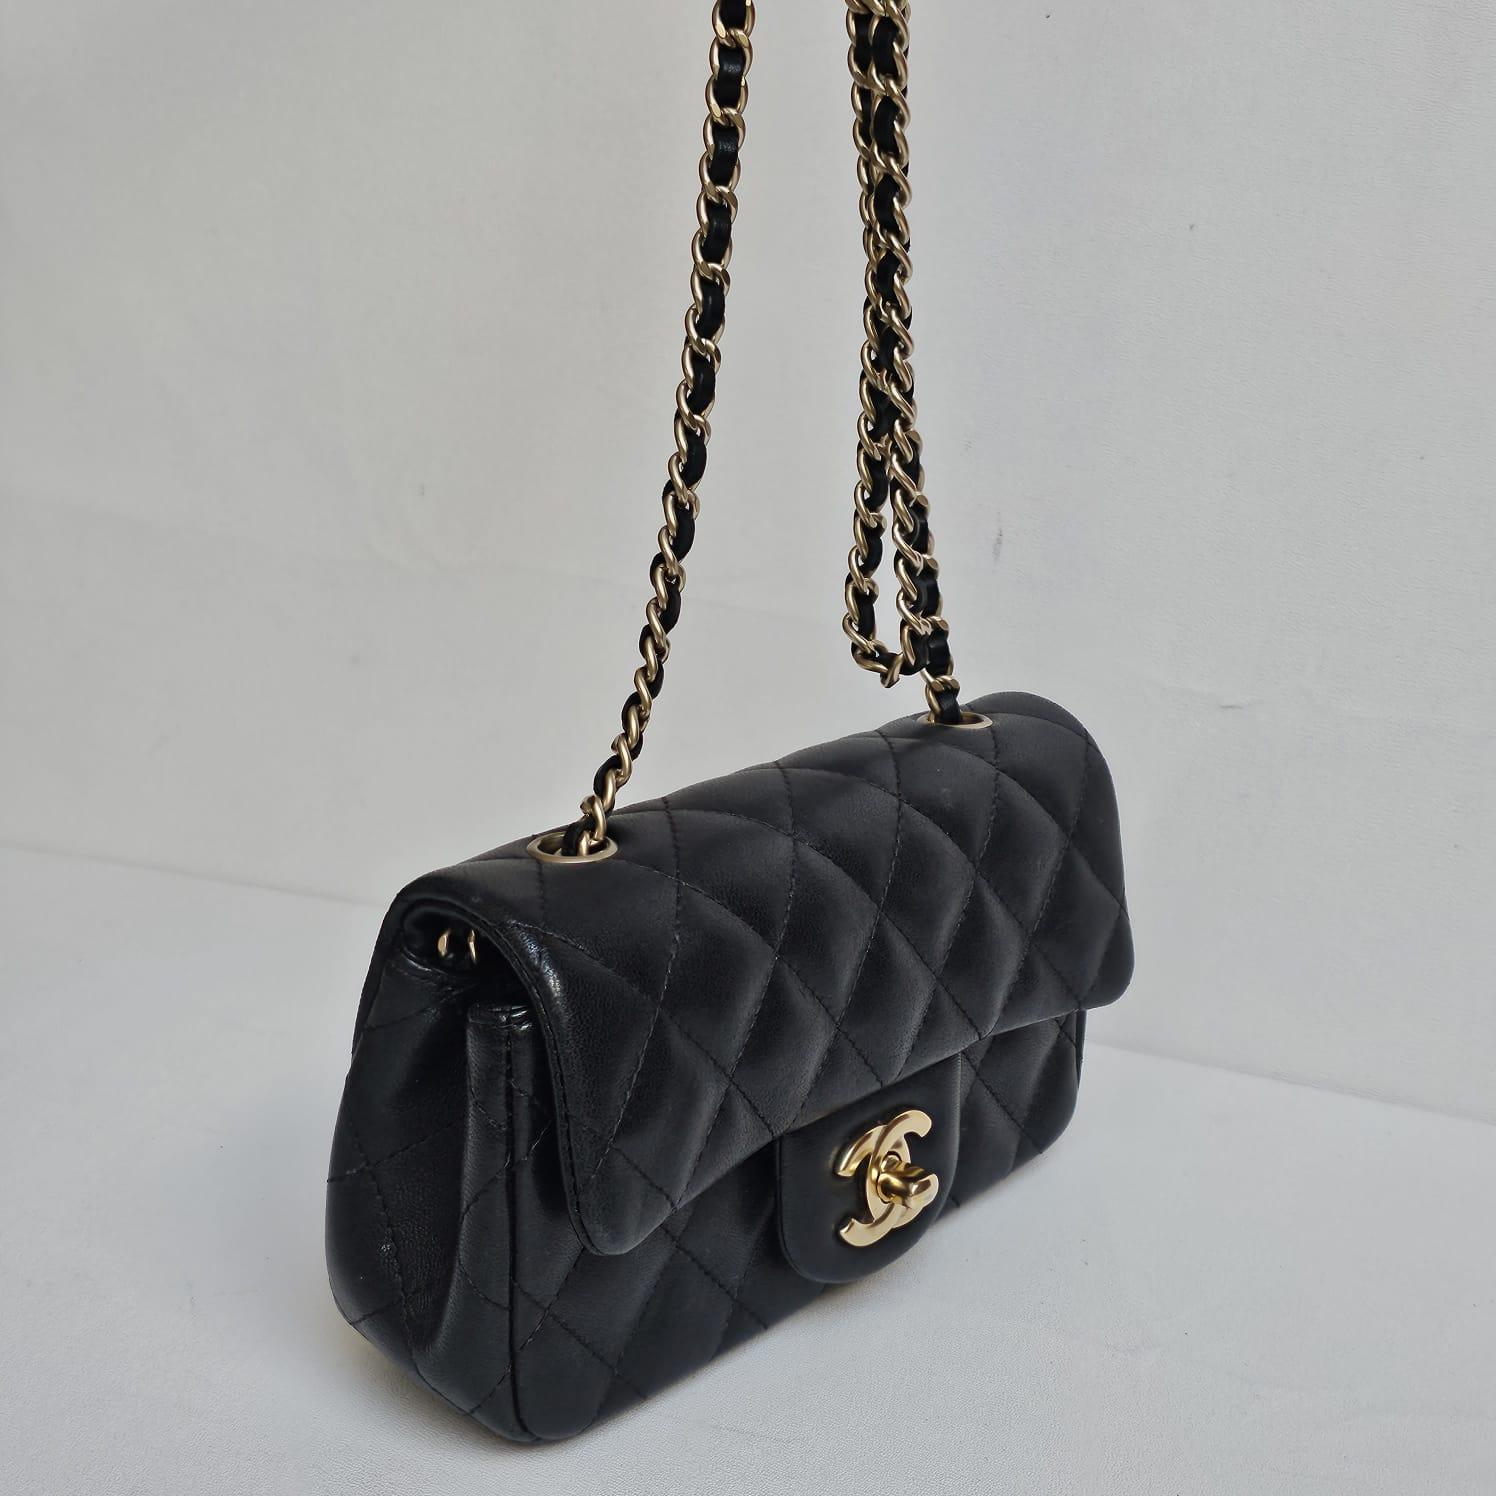 Chanel Black Lambskin Quilted Extra Mini Flap Bag For Sale 3